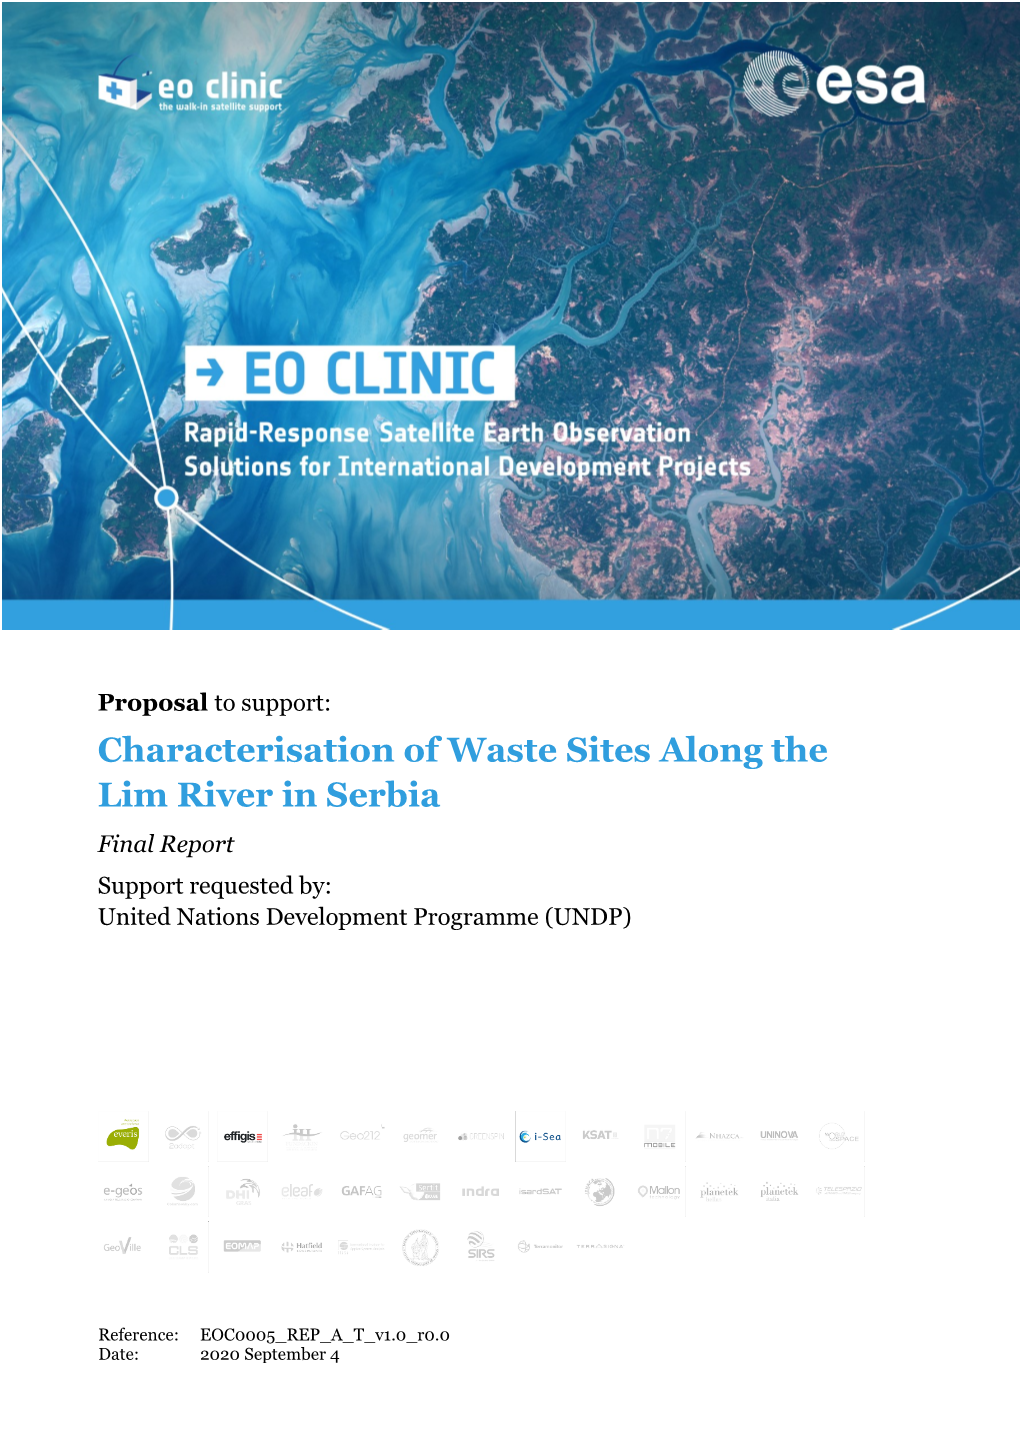 Characterisation of Waste Sites Along the Lim River in Serbia Final Report Support Requested By: United Nations Development Programme (UNDP)